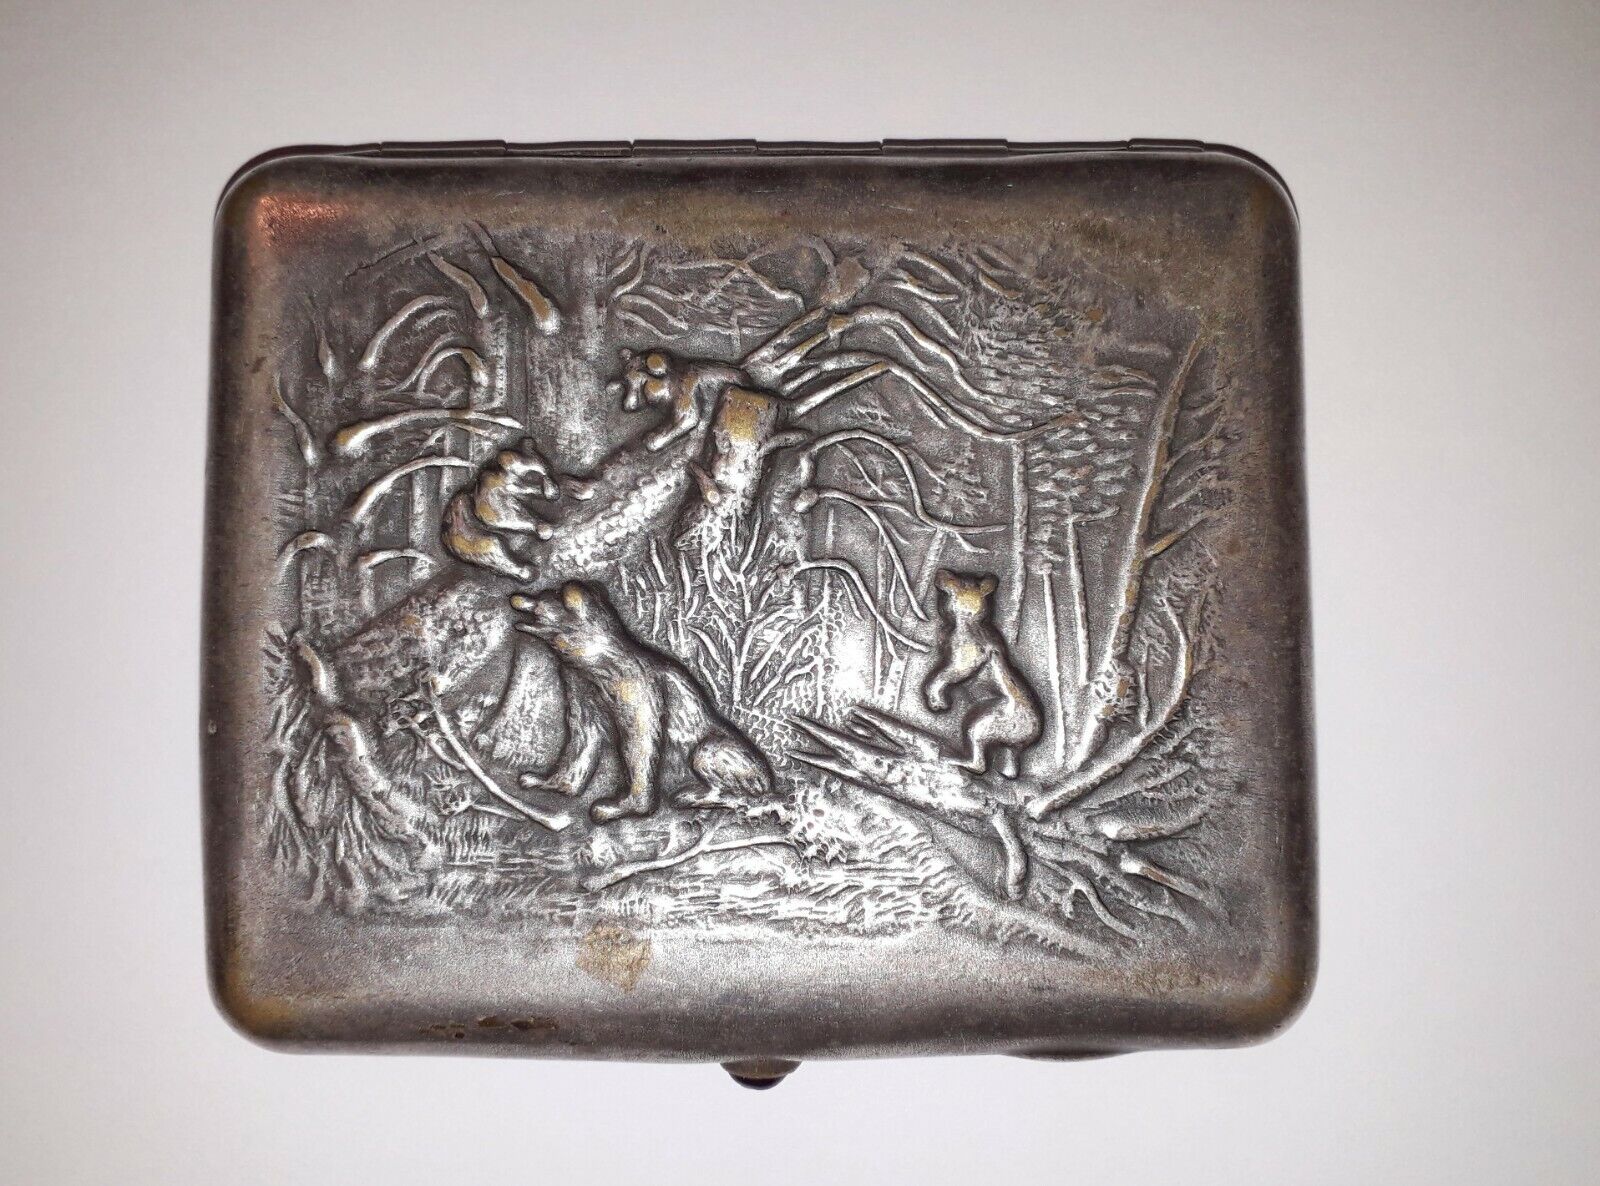 Russian Αntique brass cigarette case USSR Morning in a Pine Forest silverplated